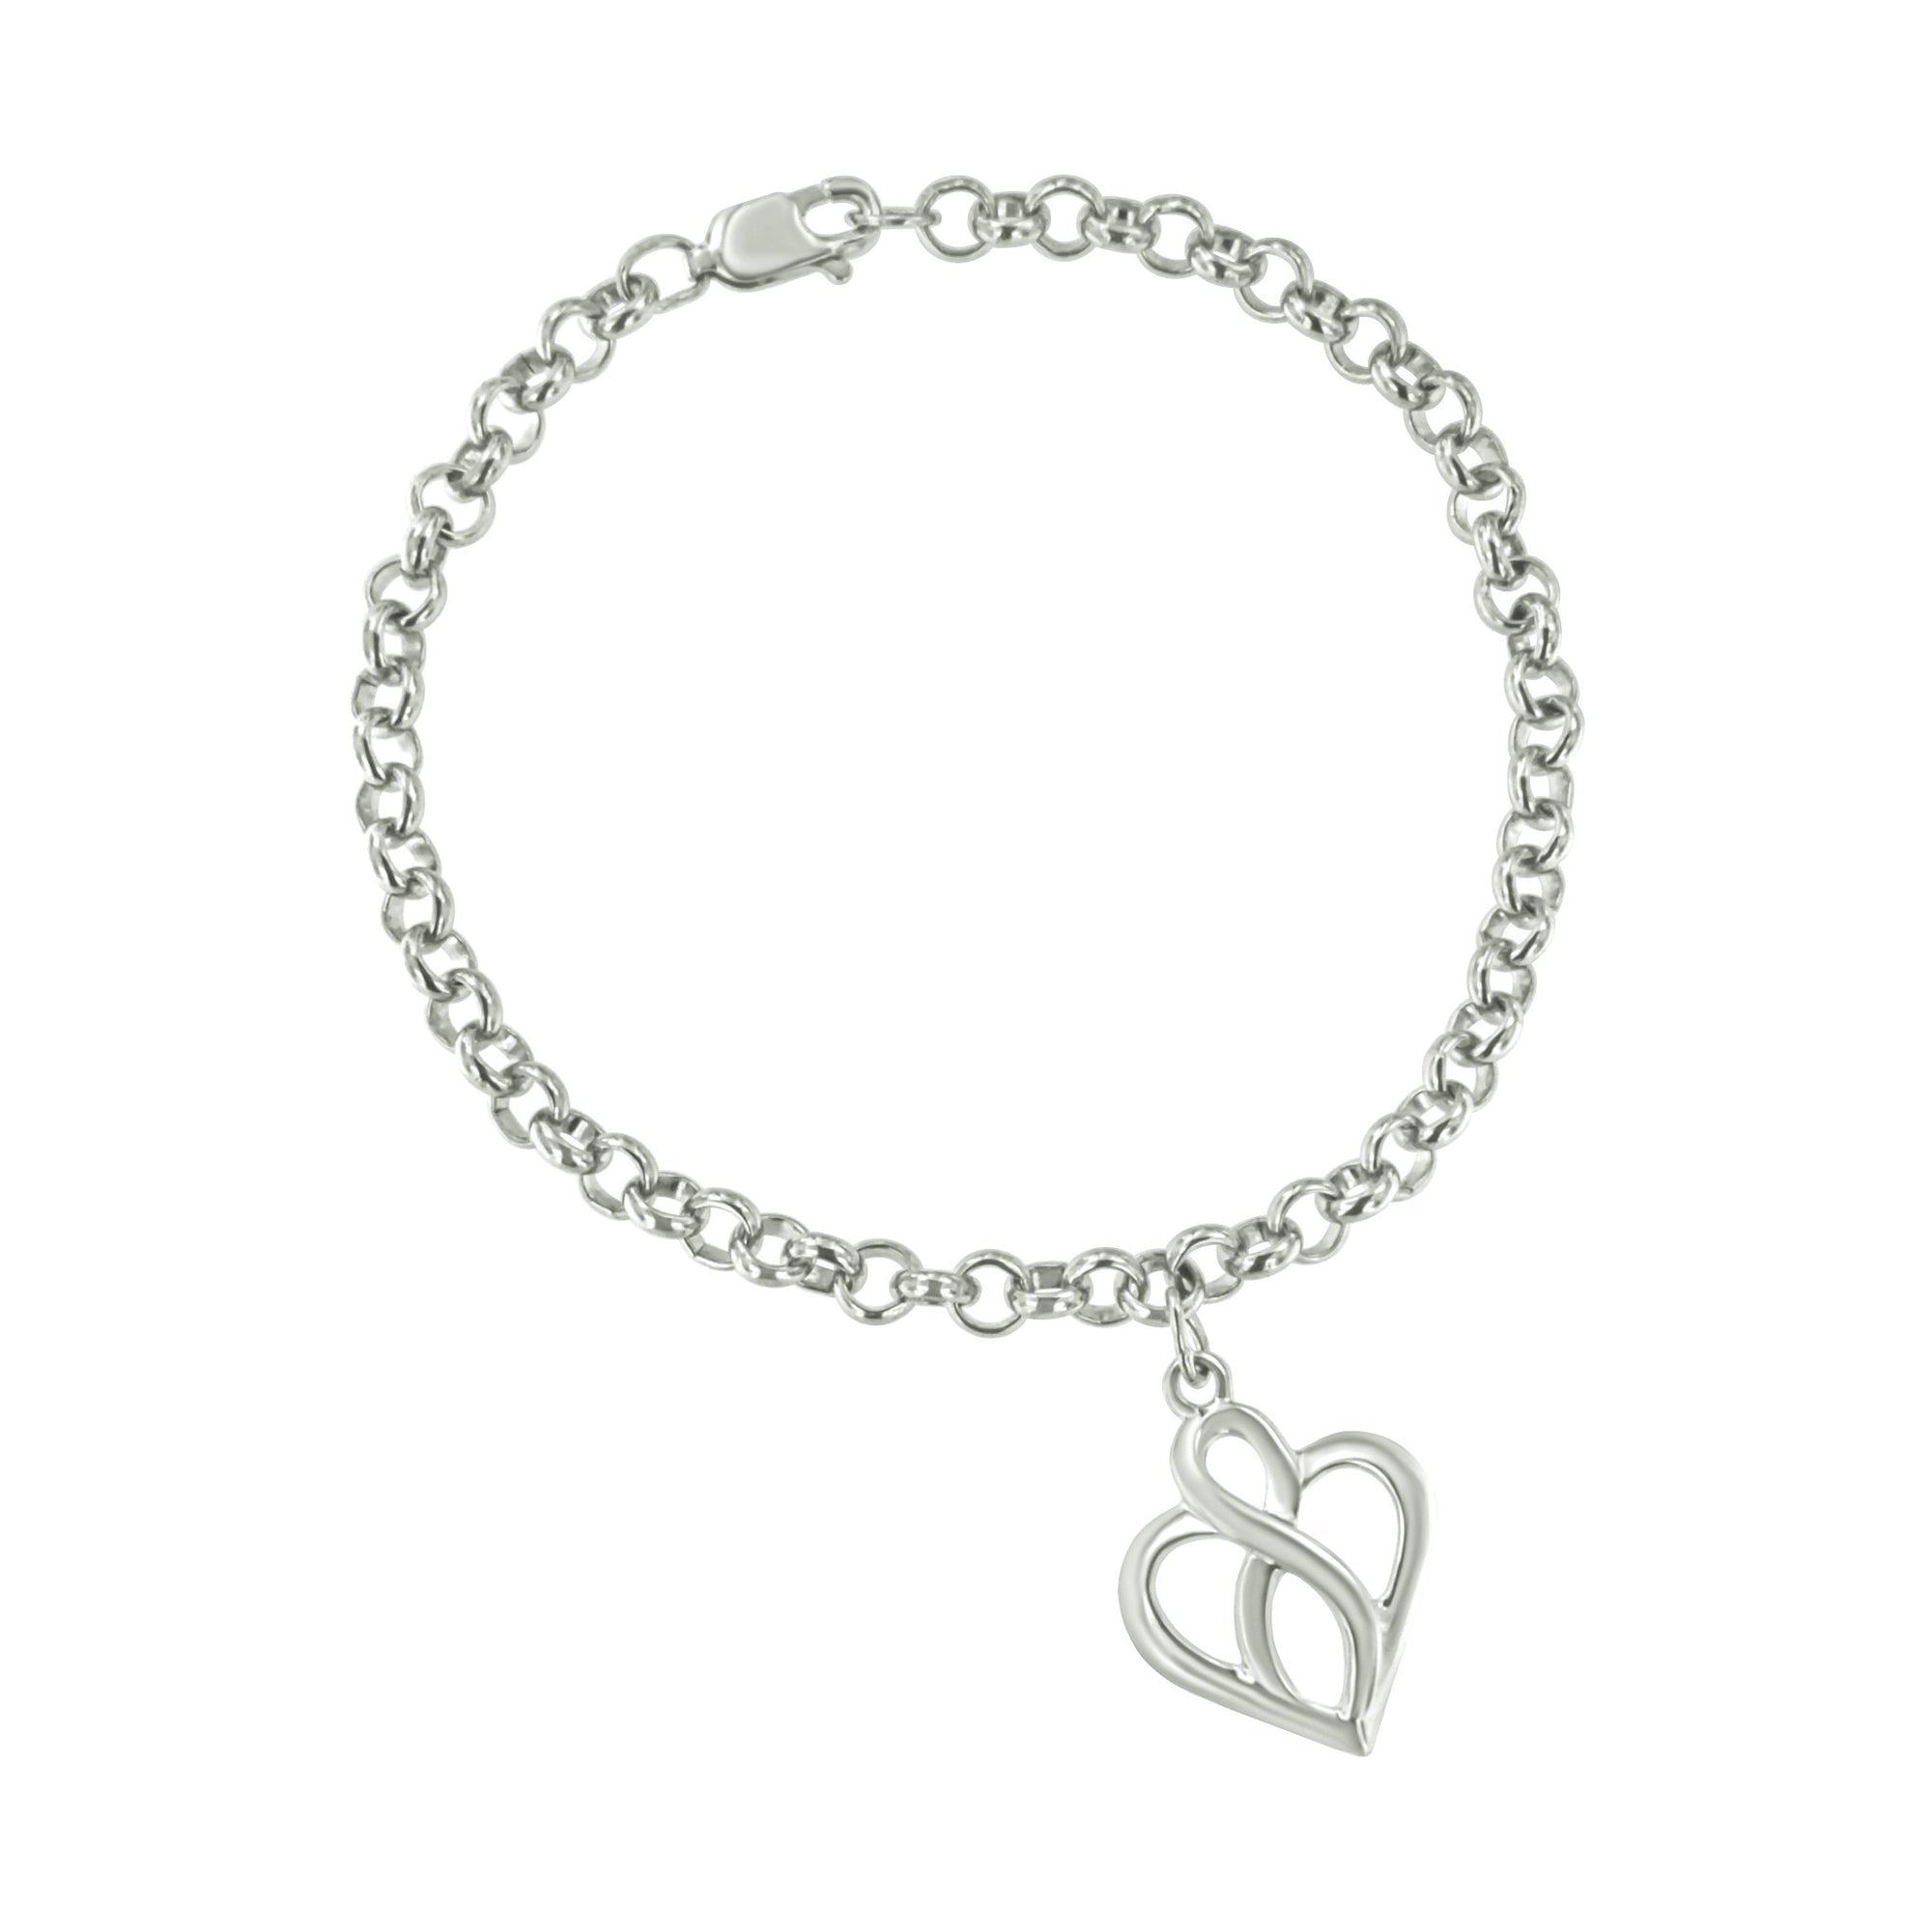 .925 Sterling Silver Open Heart with Center Vertical Infinity Chain Charm Bracelet - Size 7" - LinkagejewelrydesignLinkagejewelrydesign